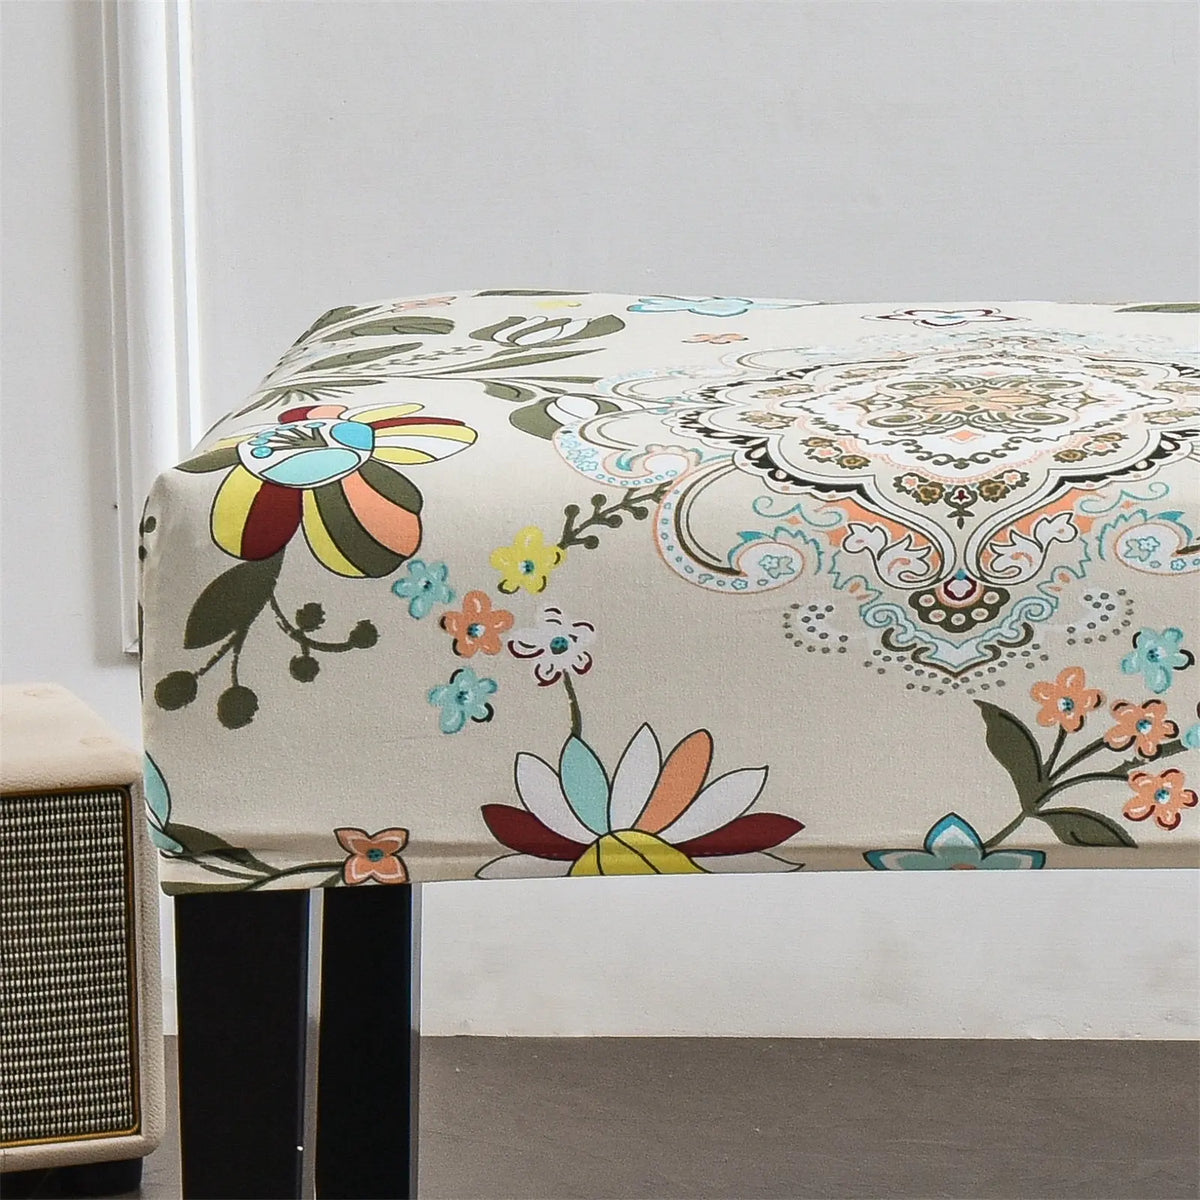 Floral Plus Size Dining Bench Cover Soft Washable Bench Ottaman Cover Slipcover BC0015 Crfatop %sku%